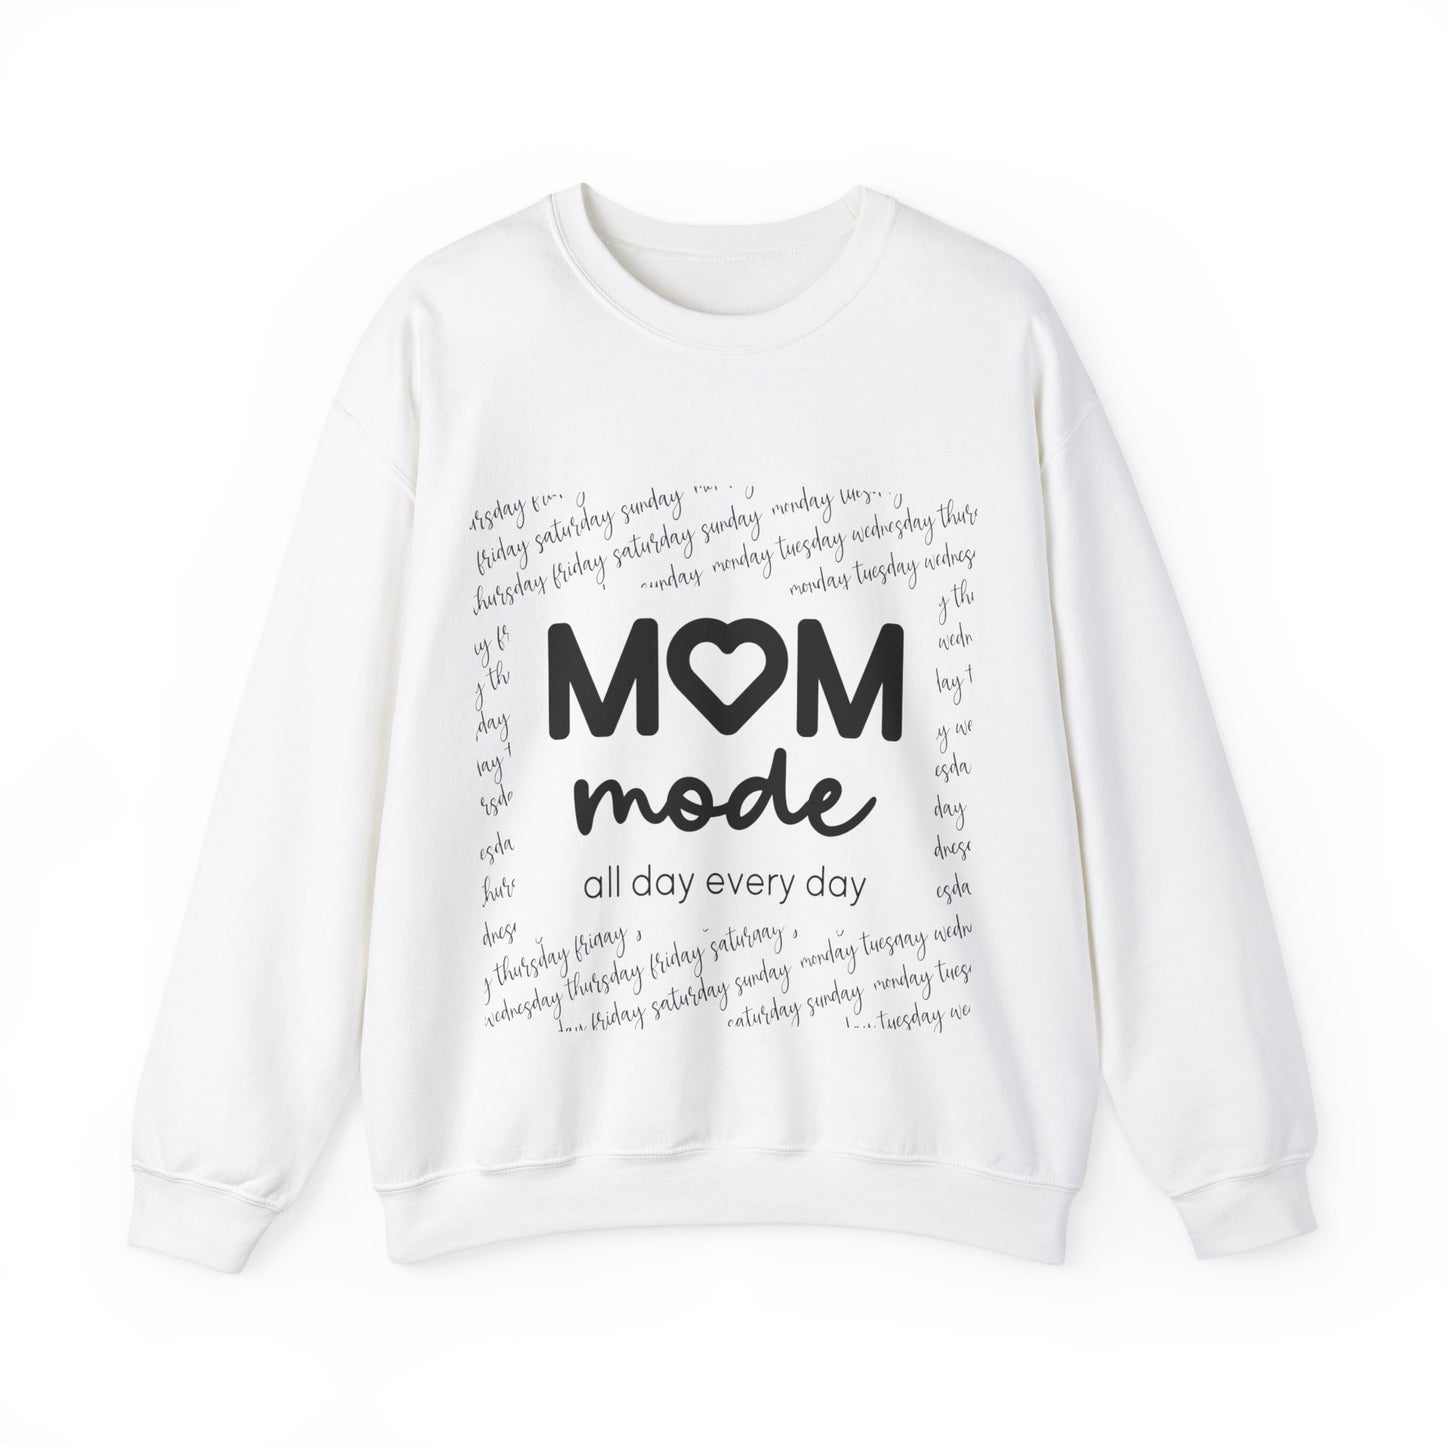 Personalized premium sweatshirt for mom, comfort and style, mother's day, gifts for mom's day, custom mama, mom mode